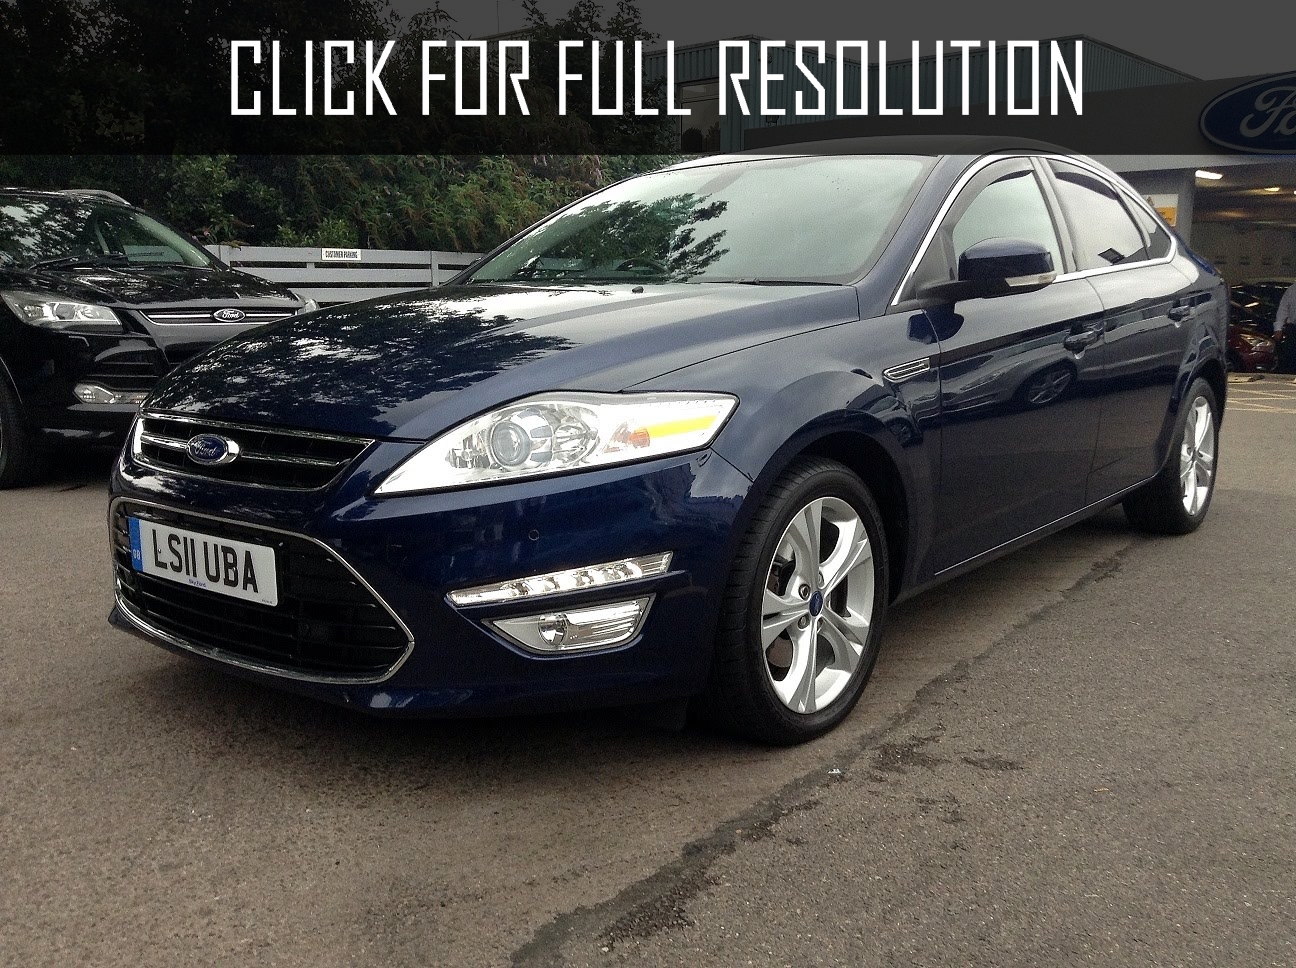 2011 Ford Mondeo Titanium news, reviews, msrp, ratings